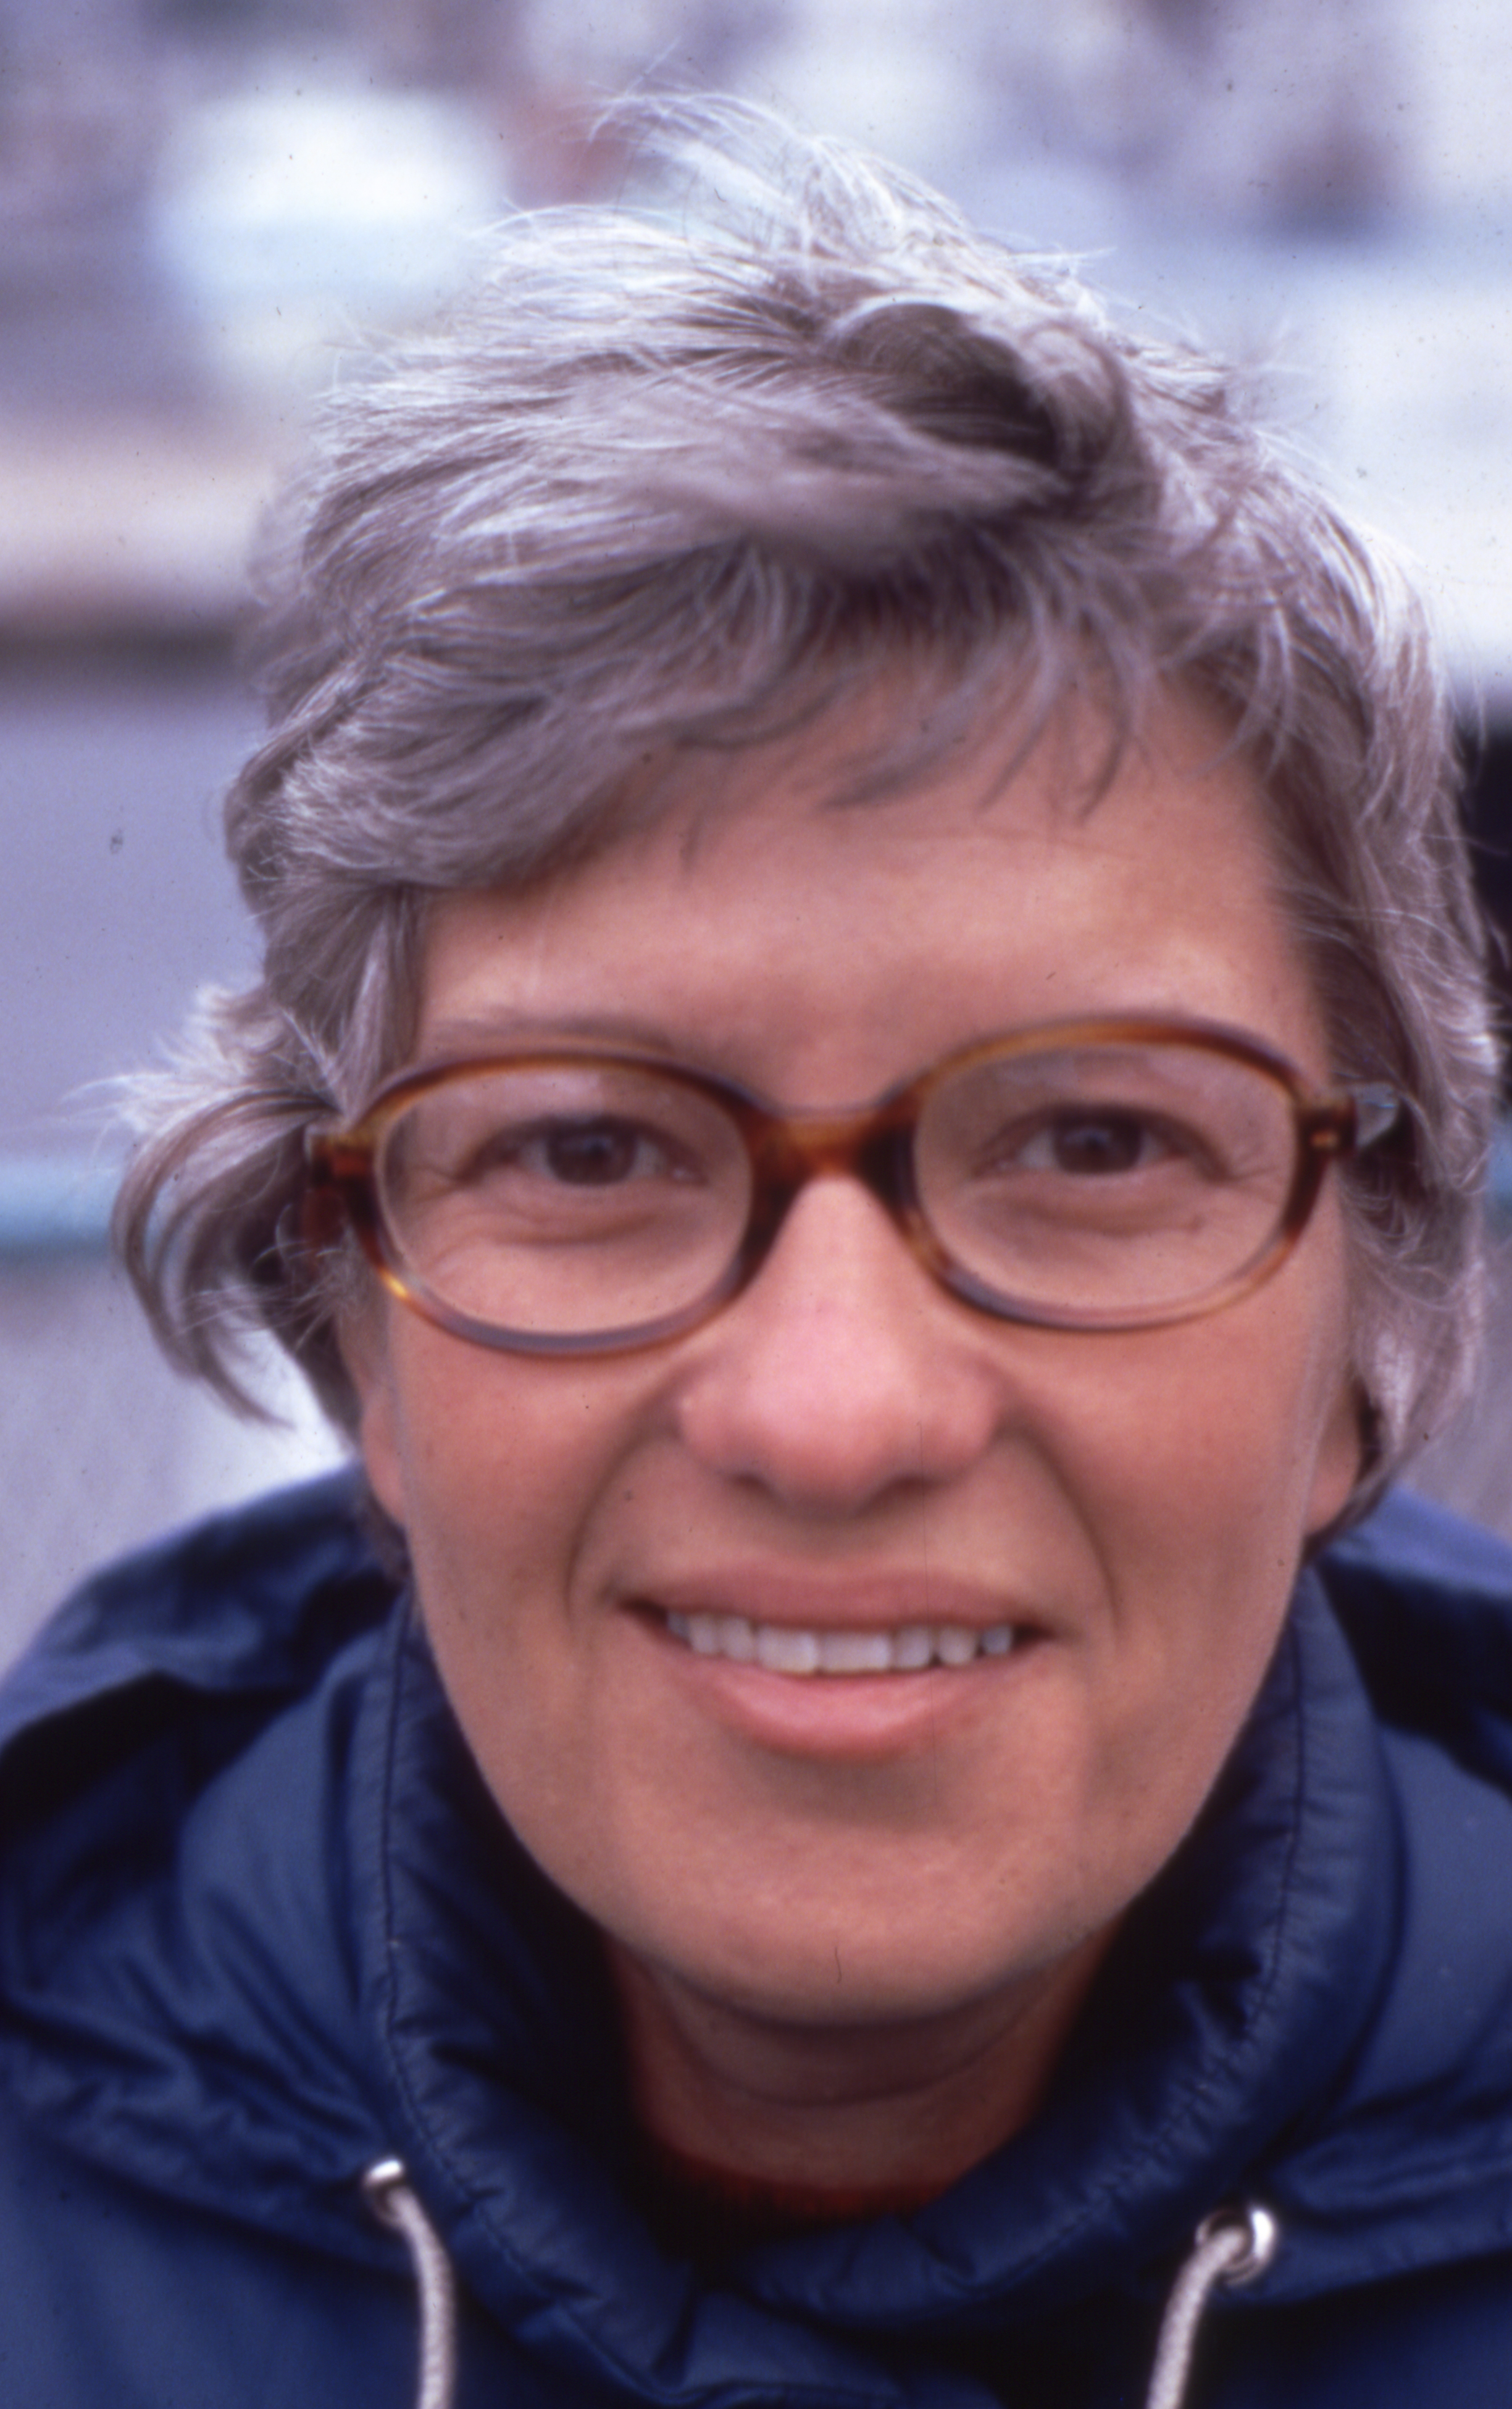 Vera Rubin at the American Astronomical Society (AAS) meeting in Seattle, 1972. Image information: Rubin Vera B5, AIP Emilio Segrè Visual Archives, John Irwin Slide Collection